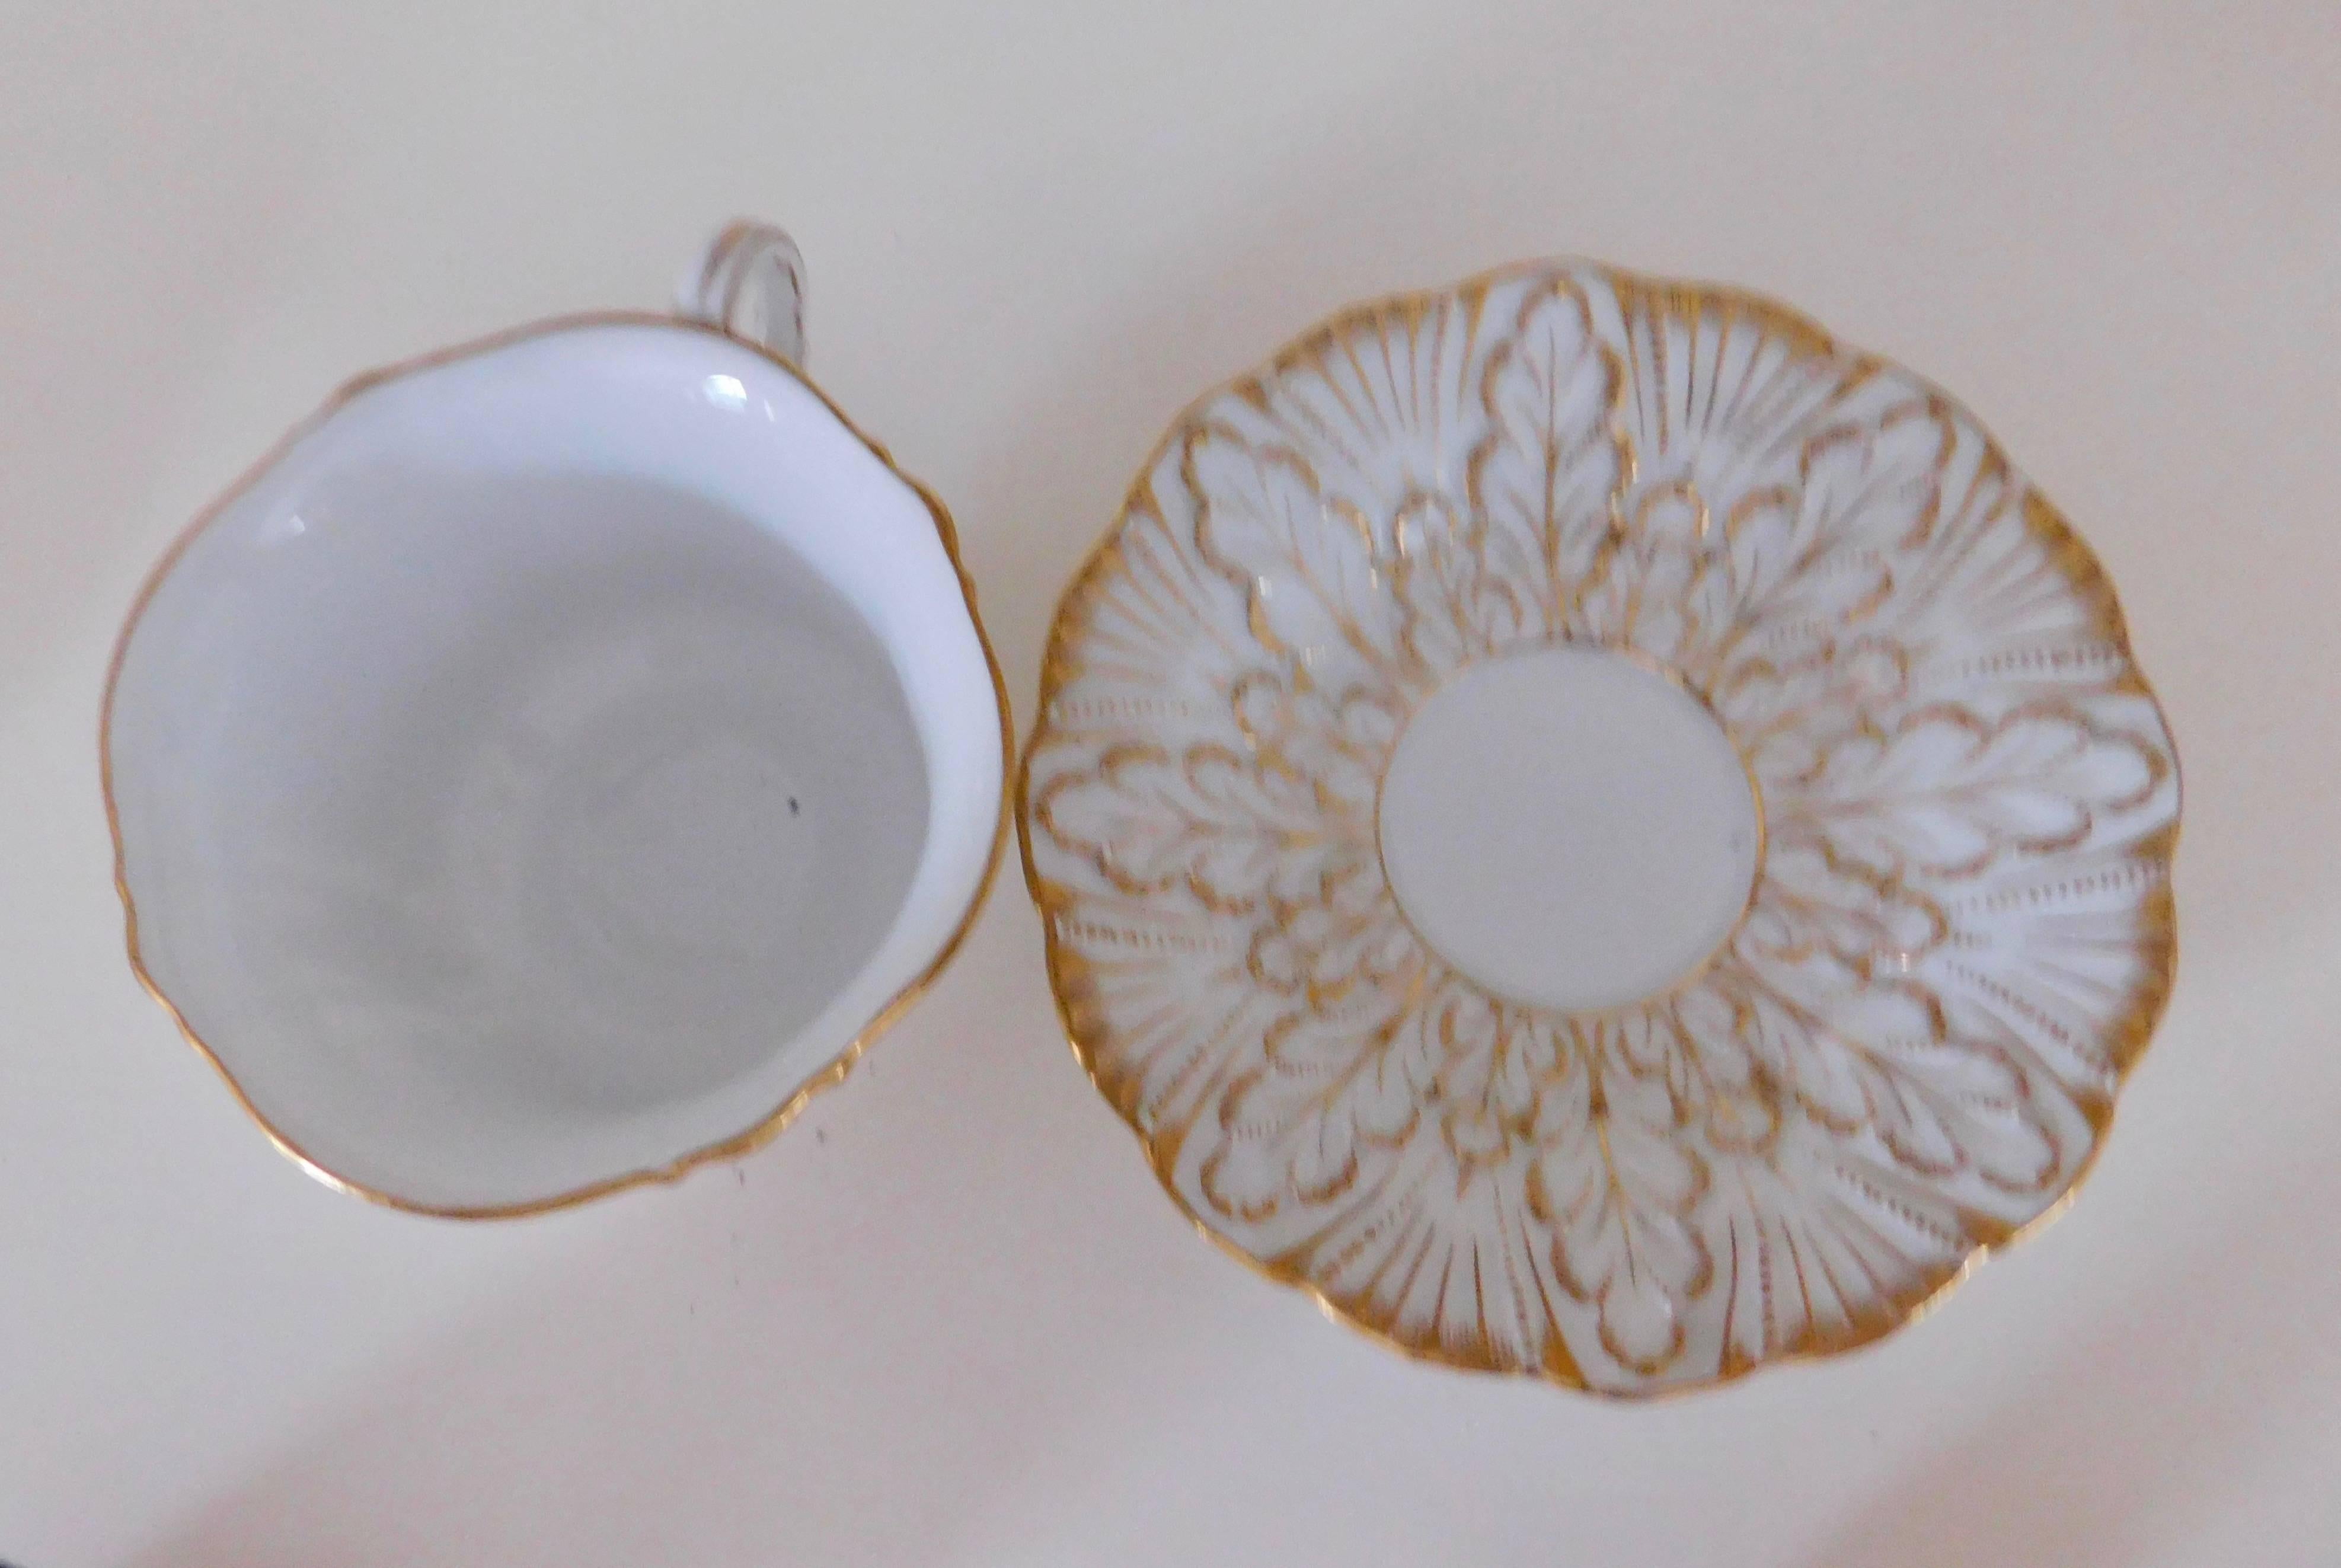 Early 20th Century Meissen Porcelain Heavy Gold Trim Embossed Cup and Saucer 1